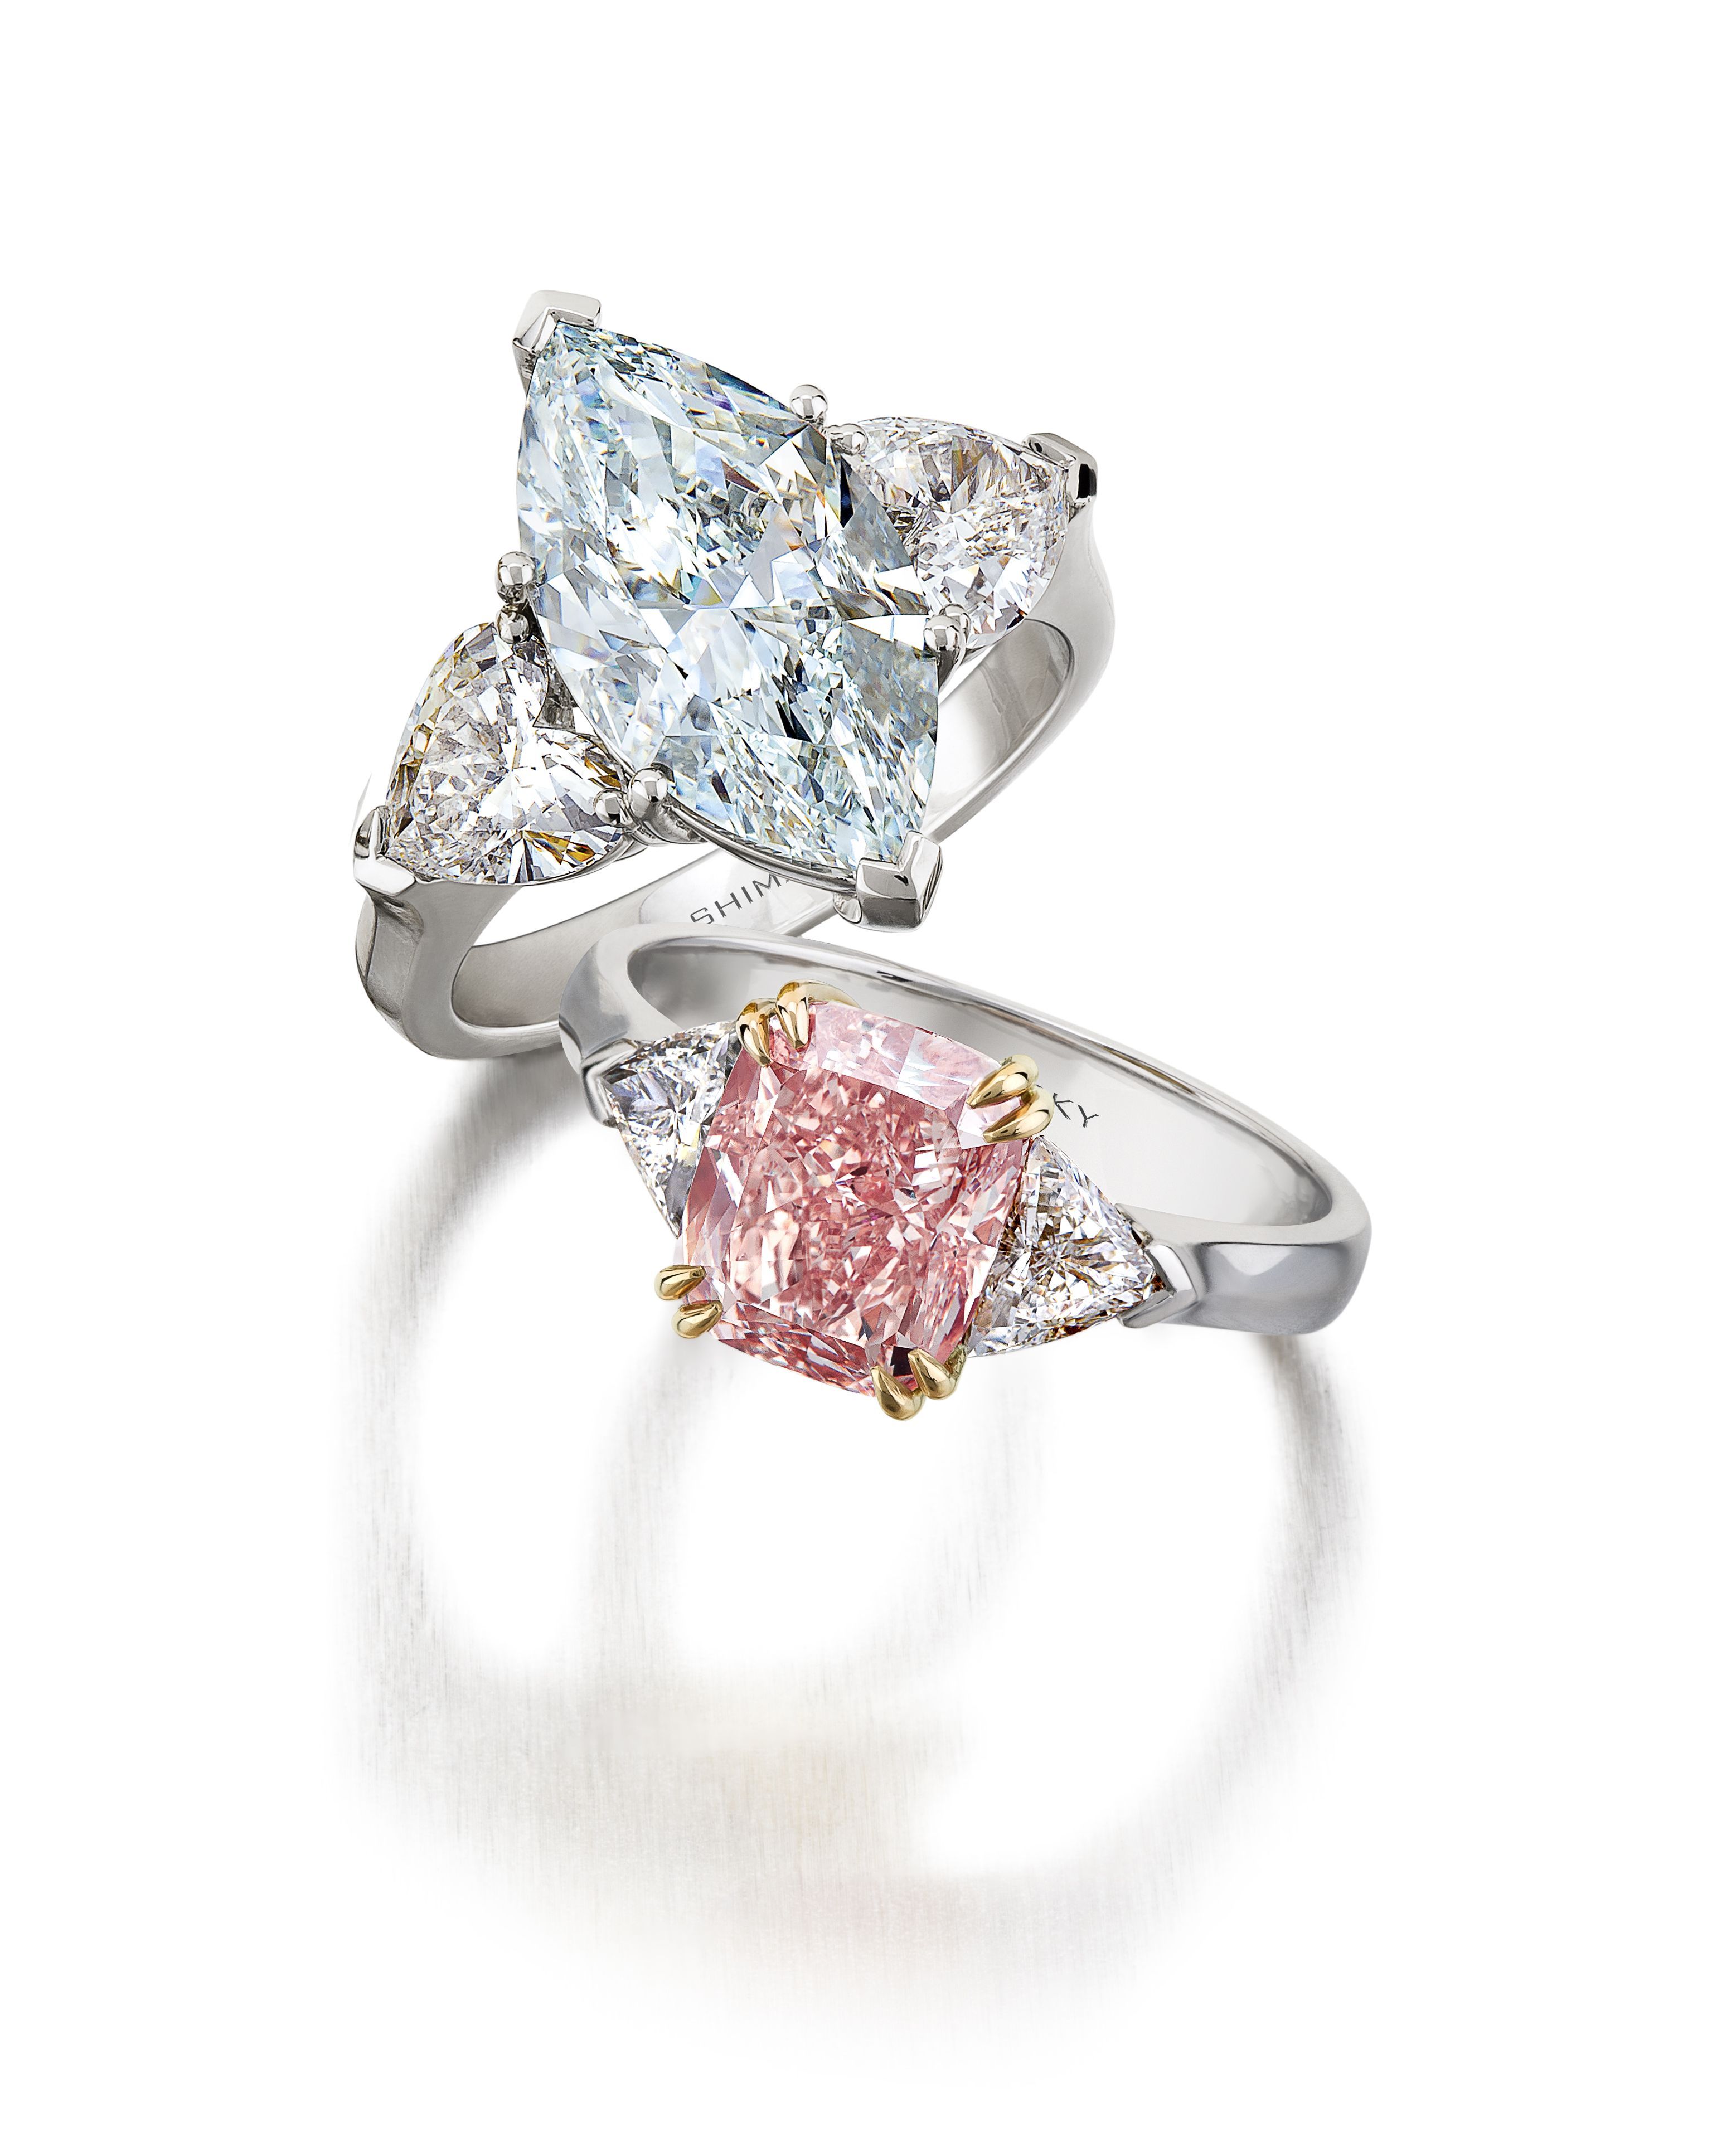 Fancies' Add A Beautiful Sparkle To Elegant Engagement Rings With Regard To Newest Elegant Sparkle Rings (View 1 of 25)